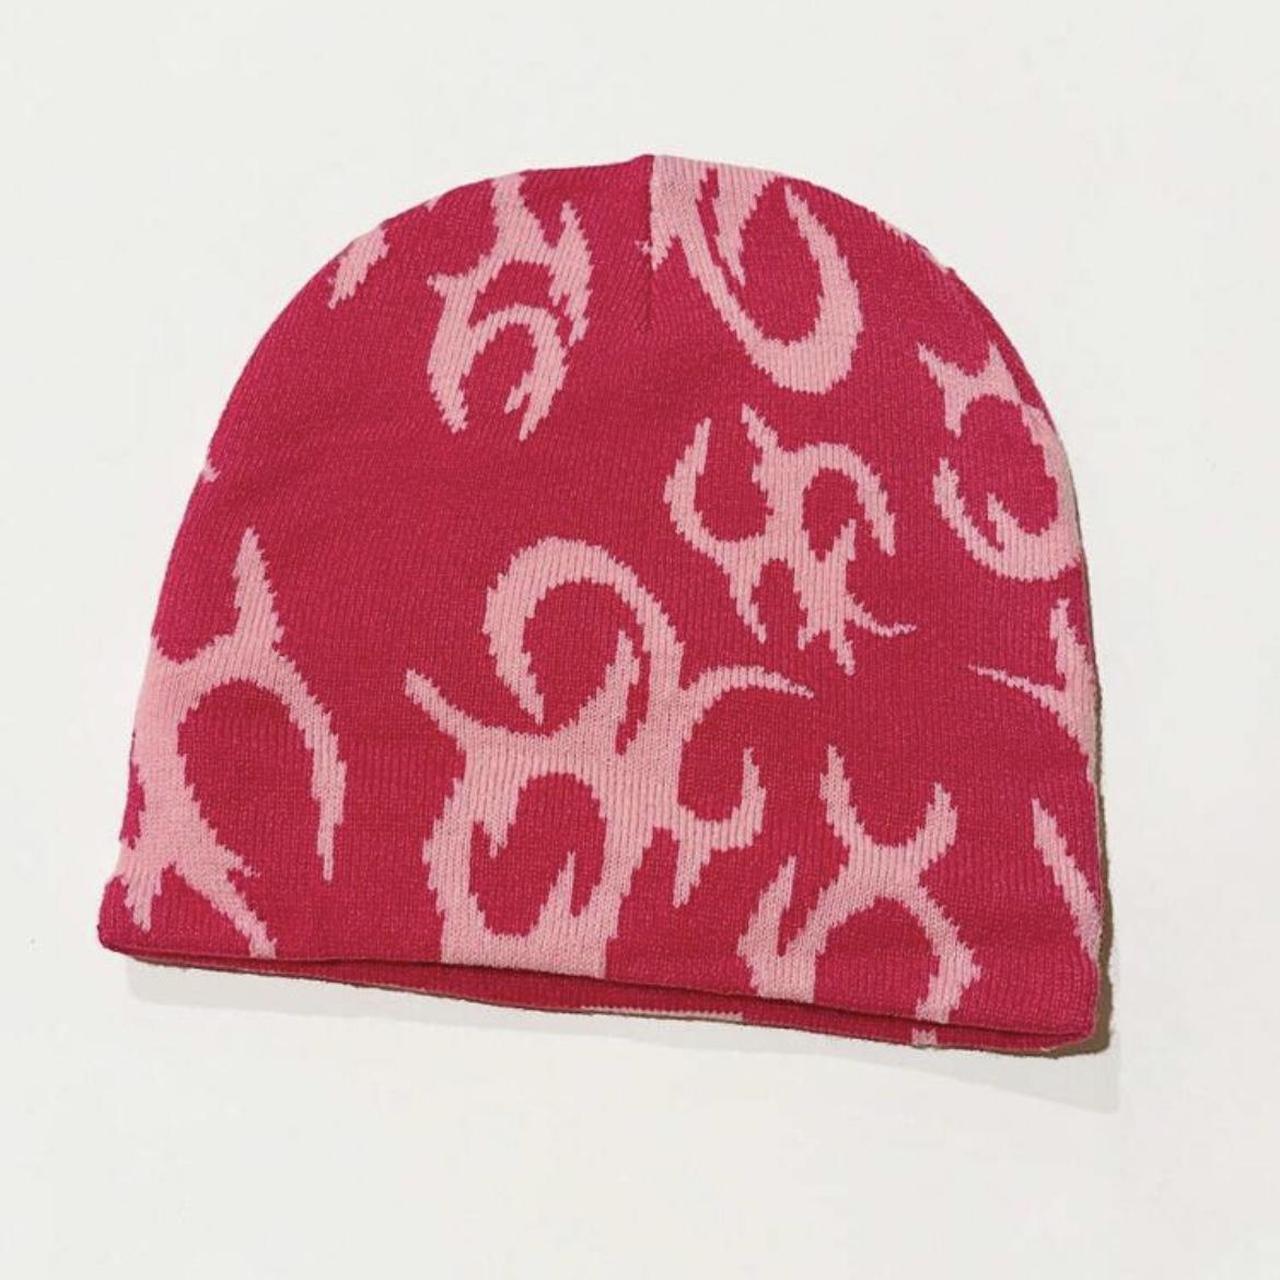 JNCO Men's Red and Pink Hat